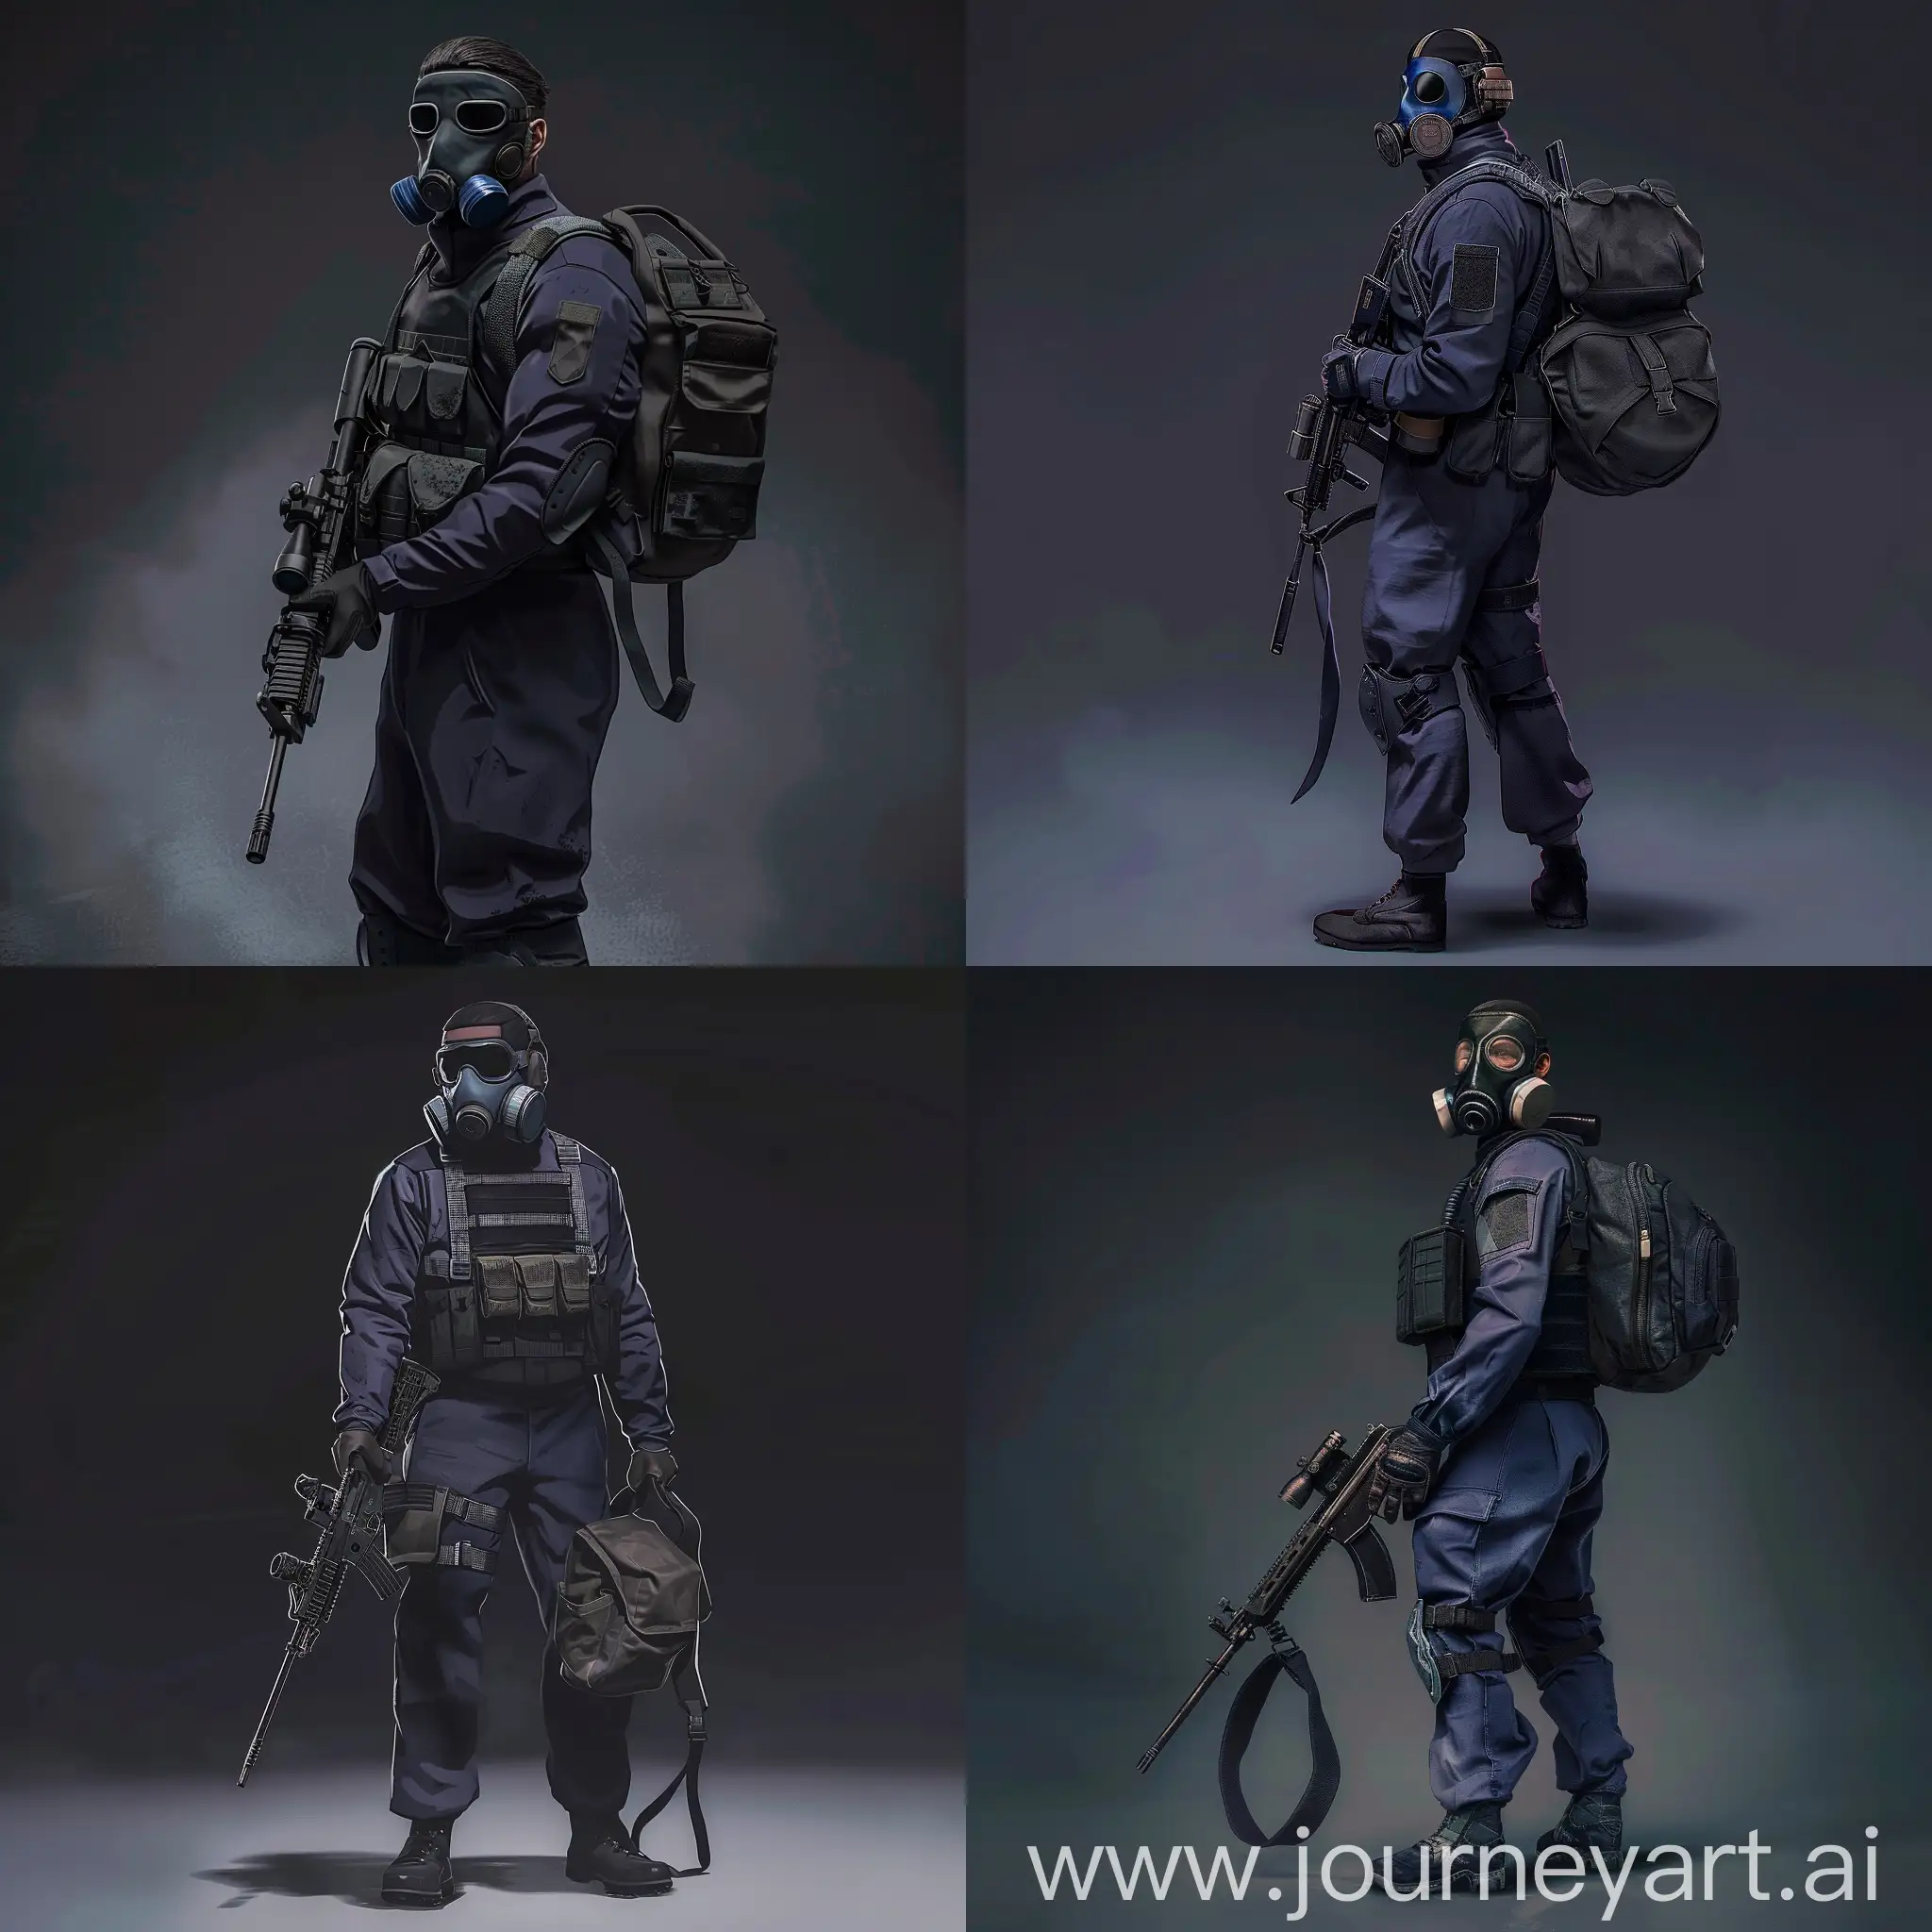 Mercenary, STALKER game, dark purple military jumpsuit, respirator-gasmask on his face, small military backpack, military unloading on his body, sniper rifle in his hands.